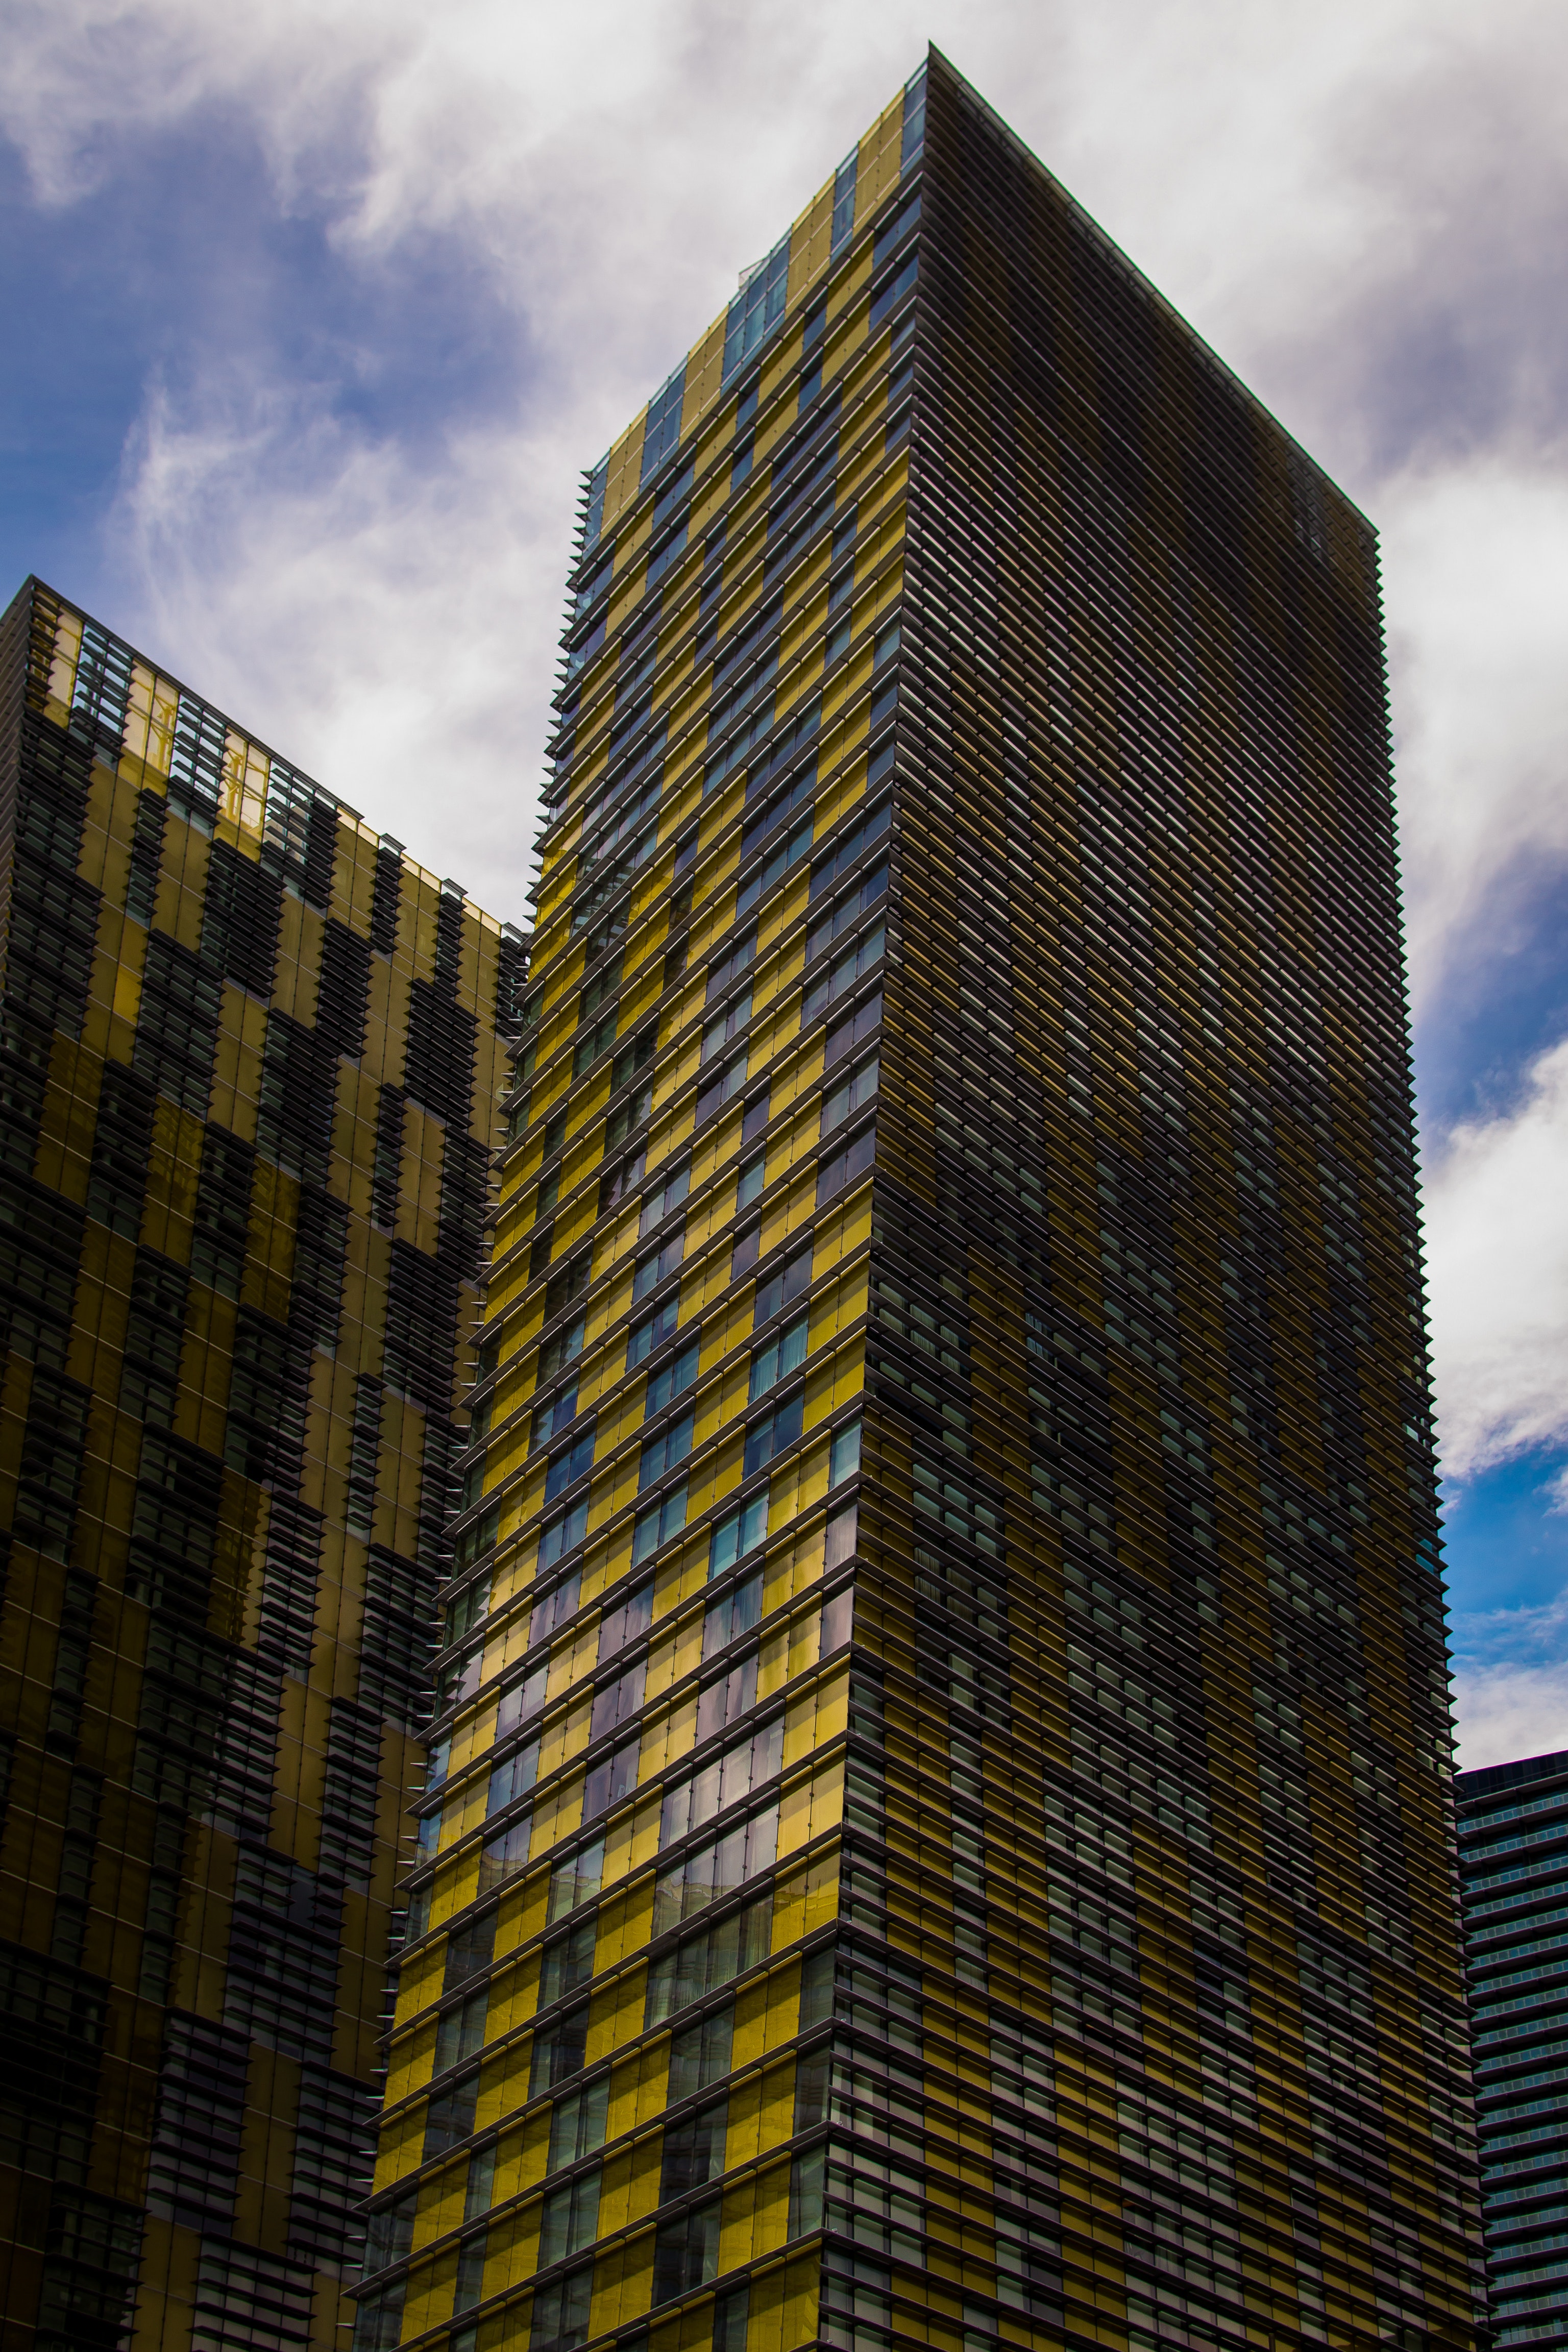 Yellow and gray high rise buildings under blue and white sunny cloudy sky photo